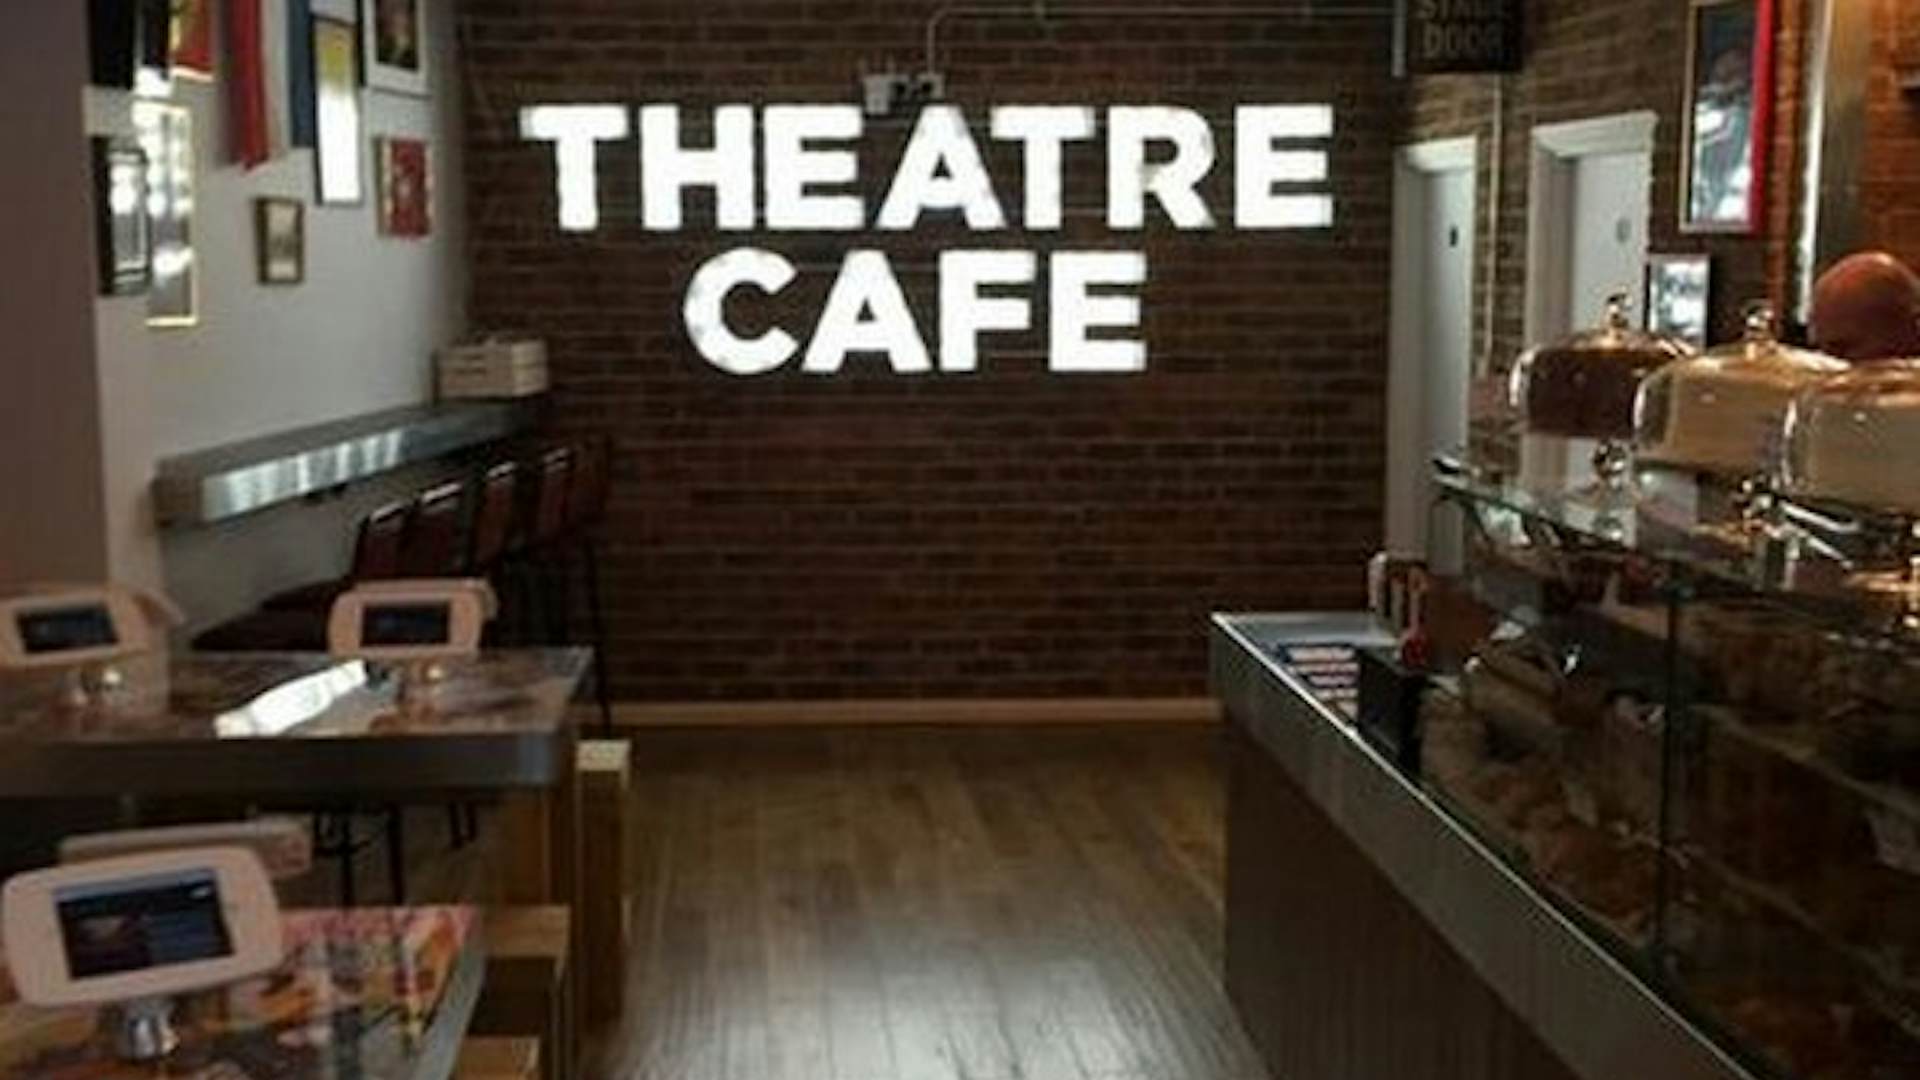 The Theatre Cafe | Events | The Theatre Cafe1920 x 1080